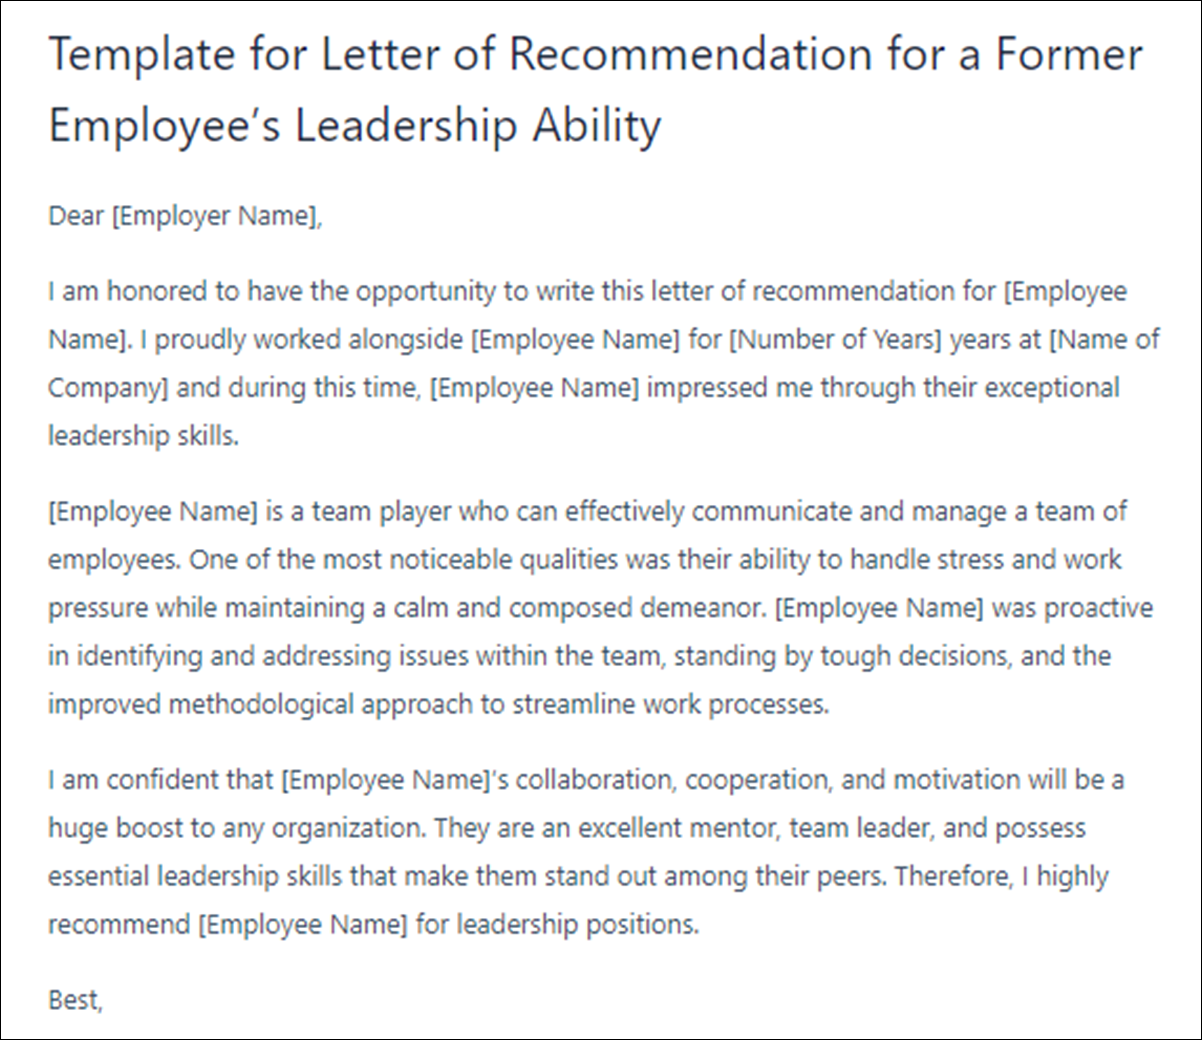 Letter of Recommendation Templates for Former Employees